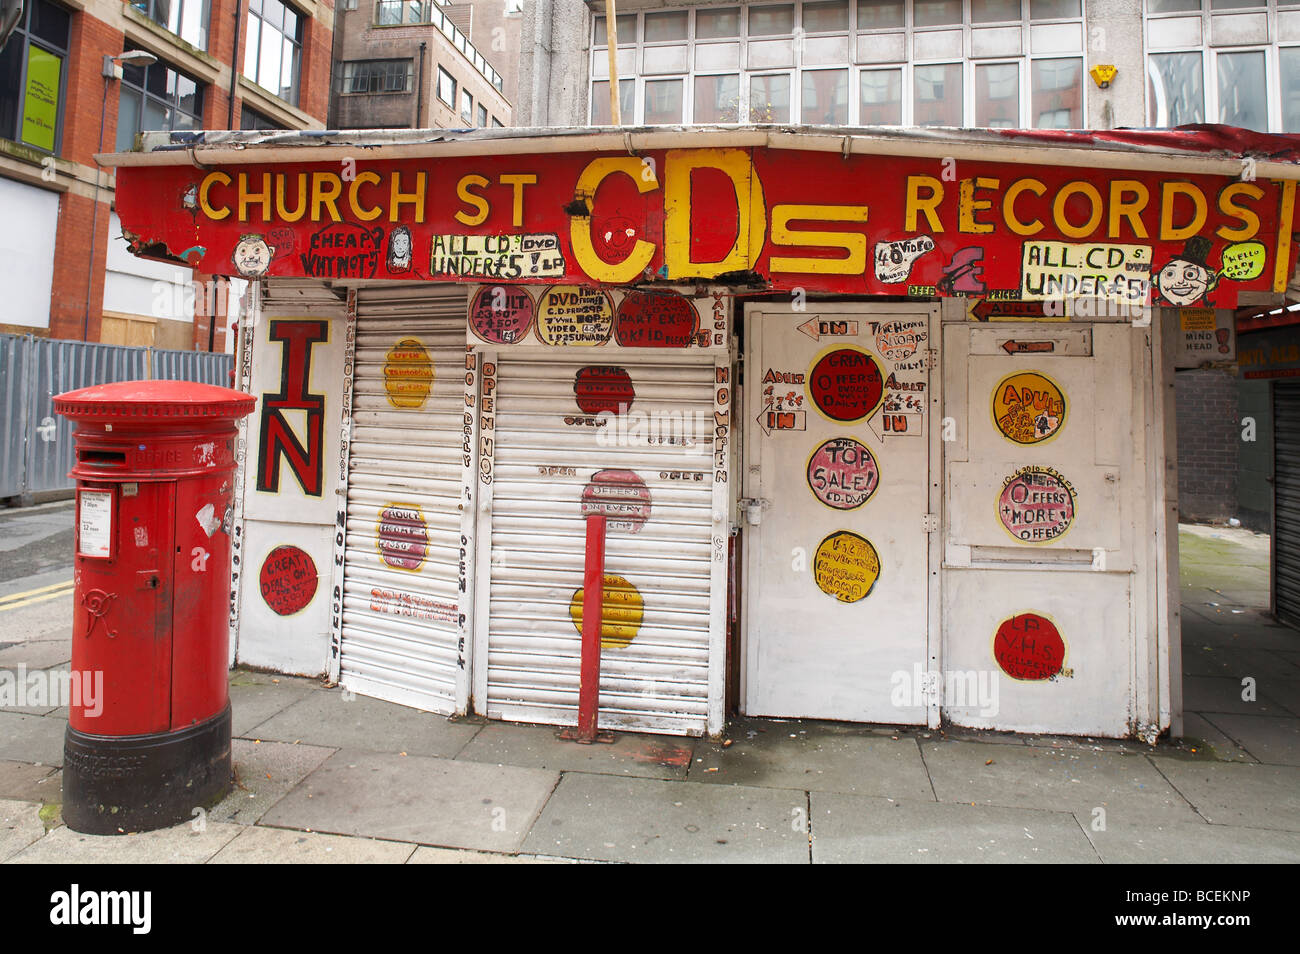 Church street CD and record shop in Manchester UK Stock Photo